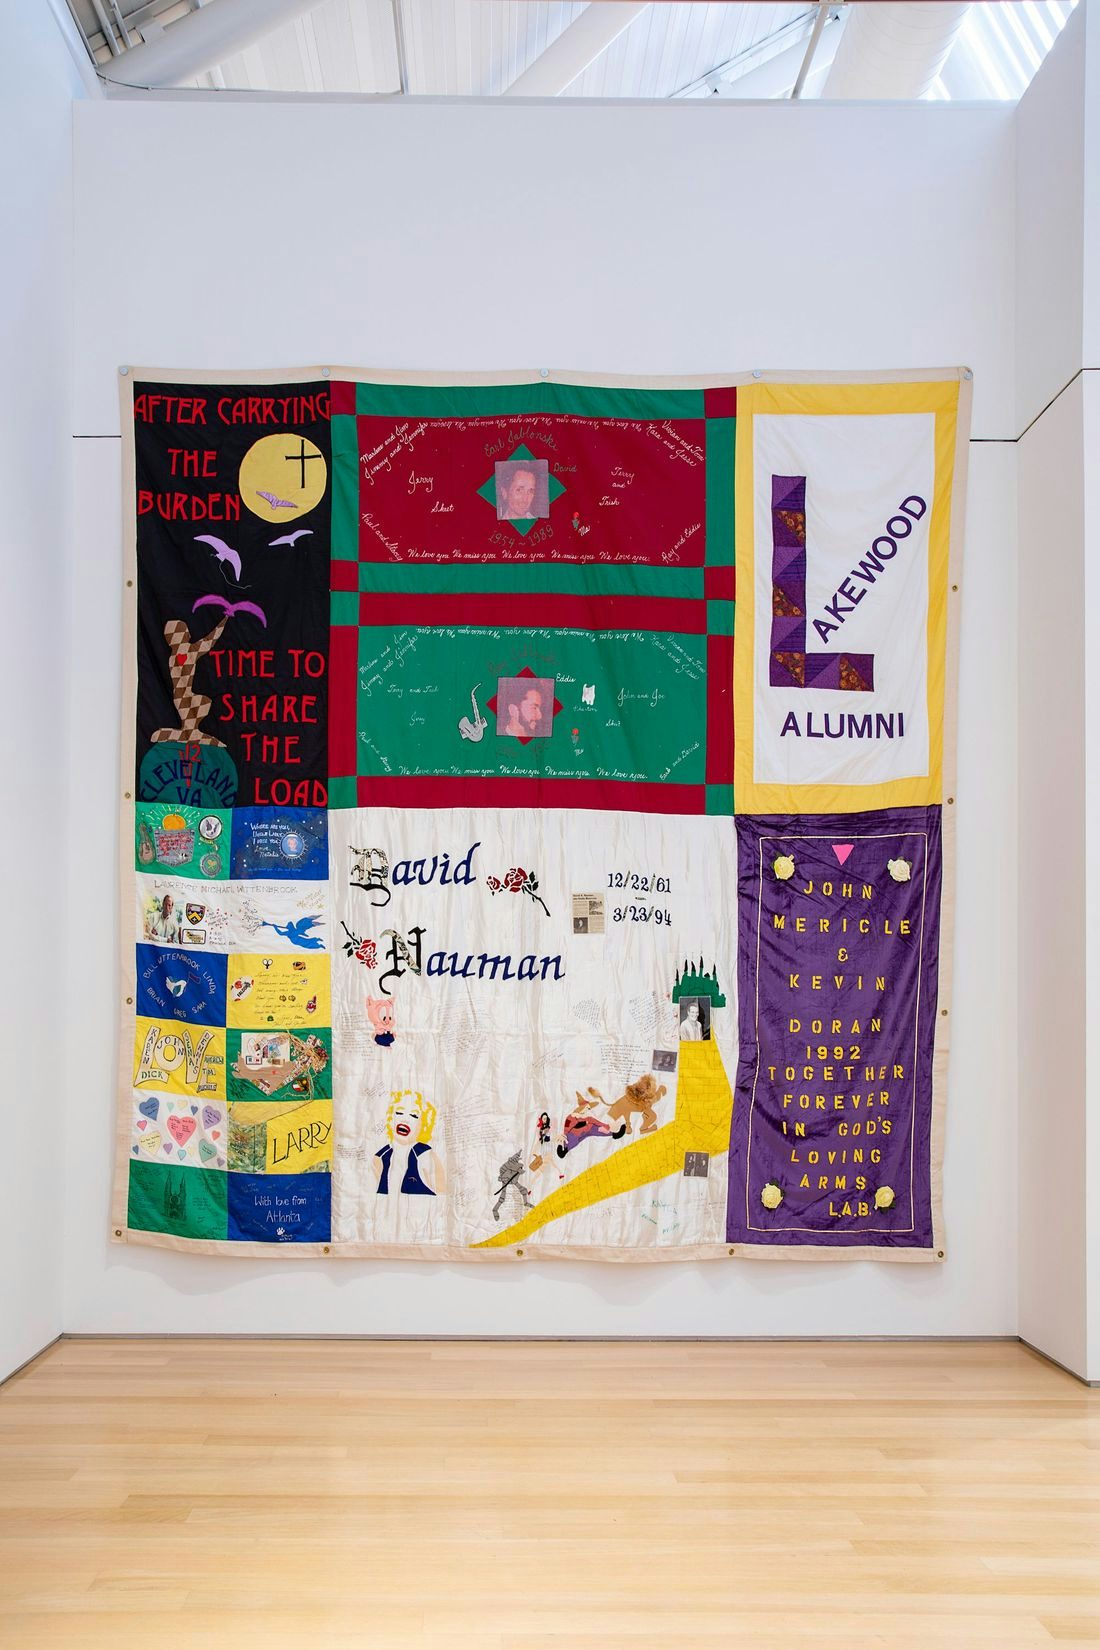 Installation image of an AIDS memorial quilt